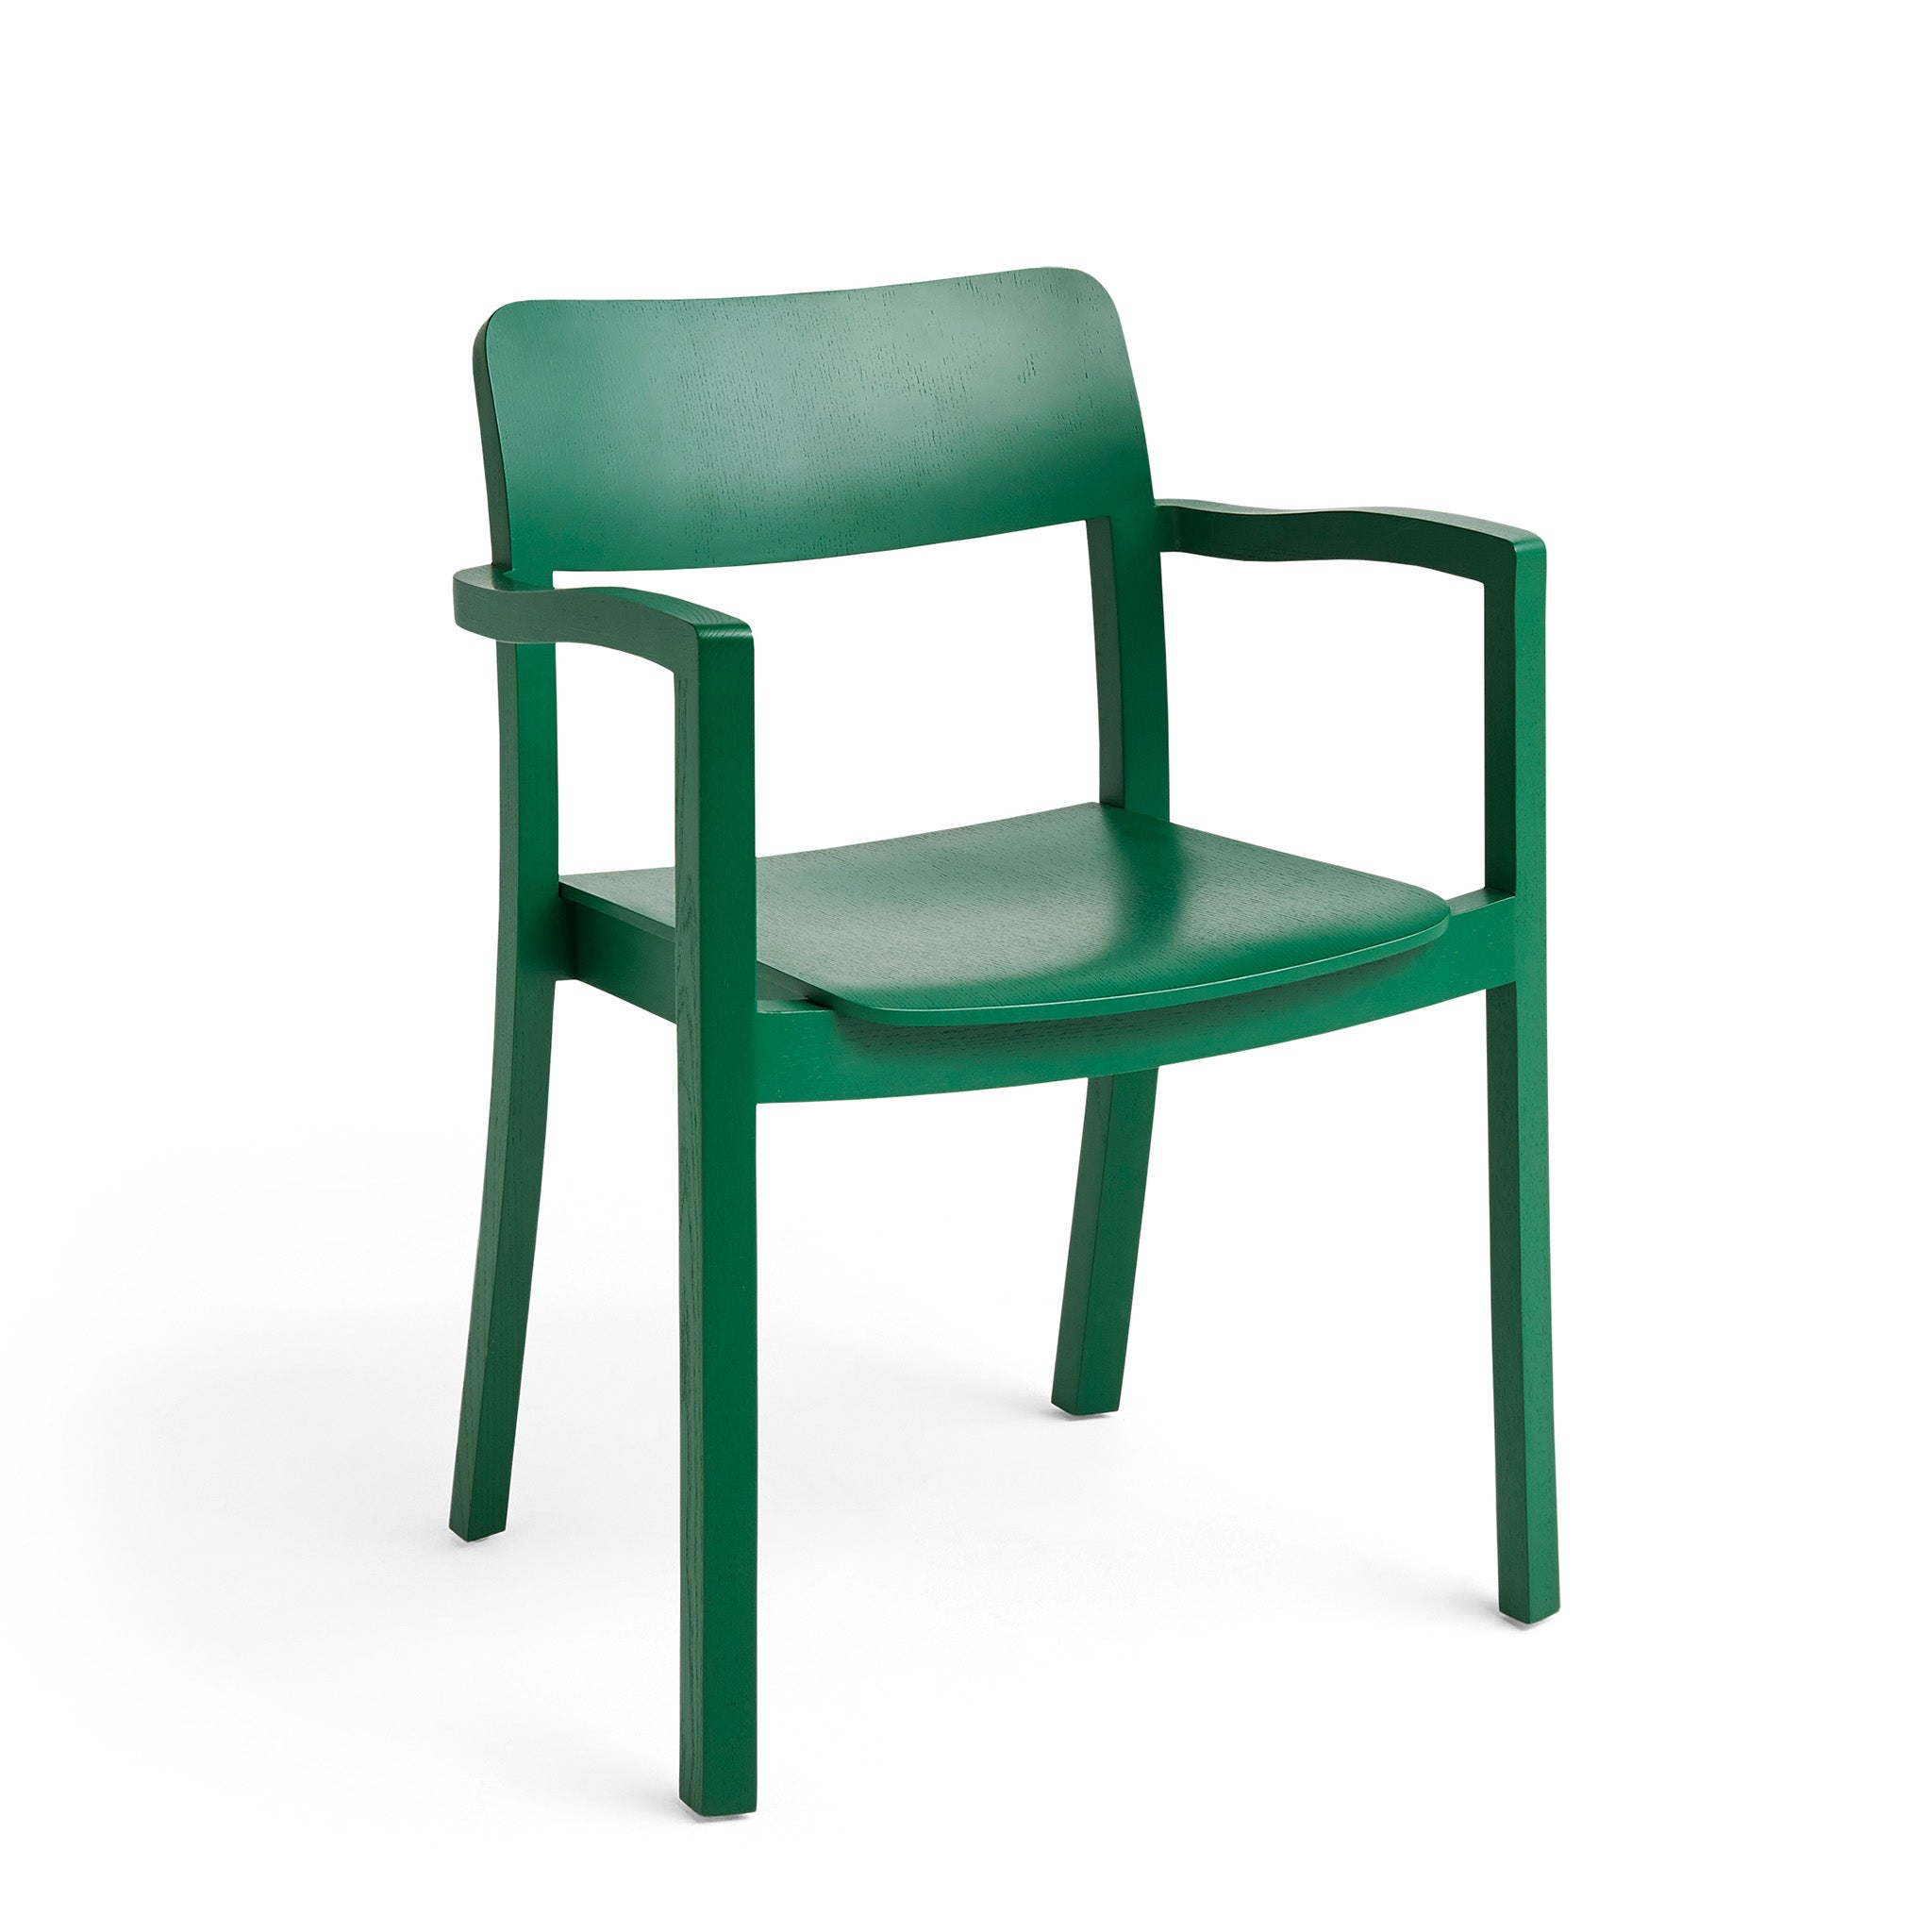 Pastis Armchair by Julien Renault for Hay